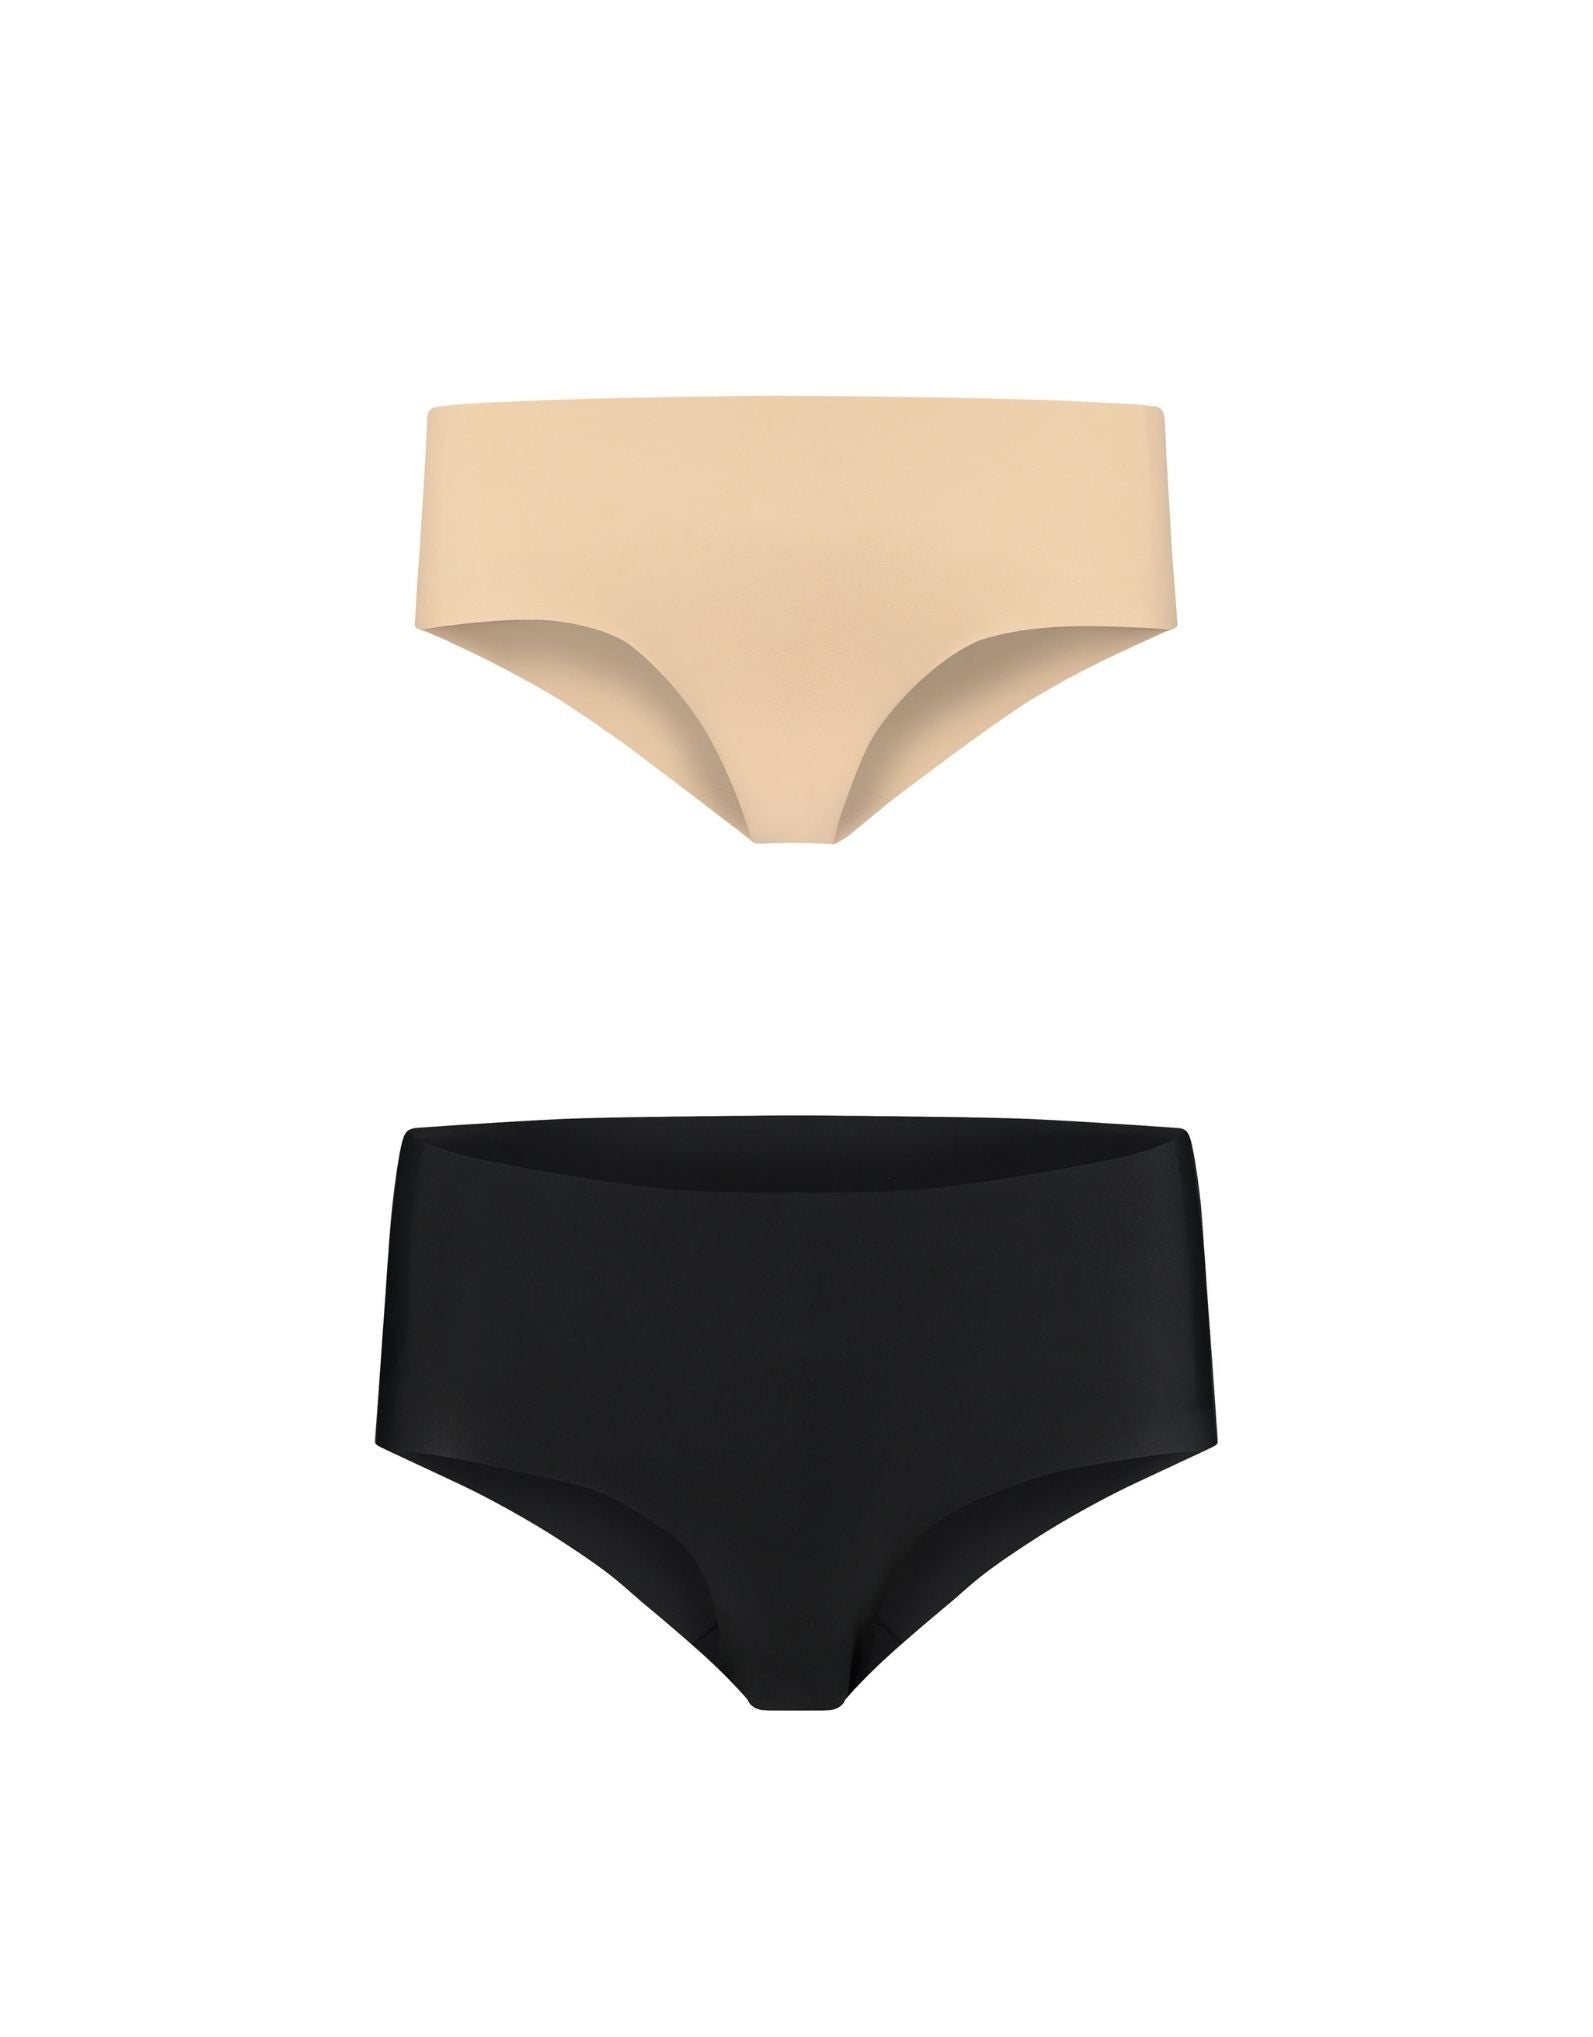 Invisible hipster panties - beige and black duo pack